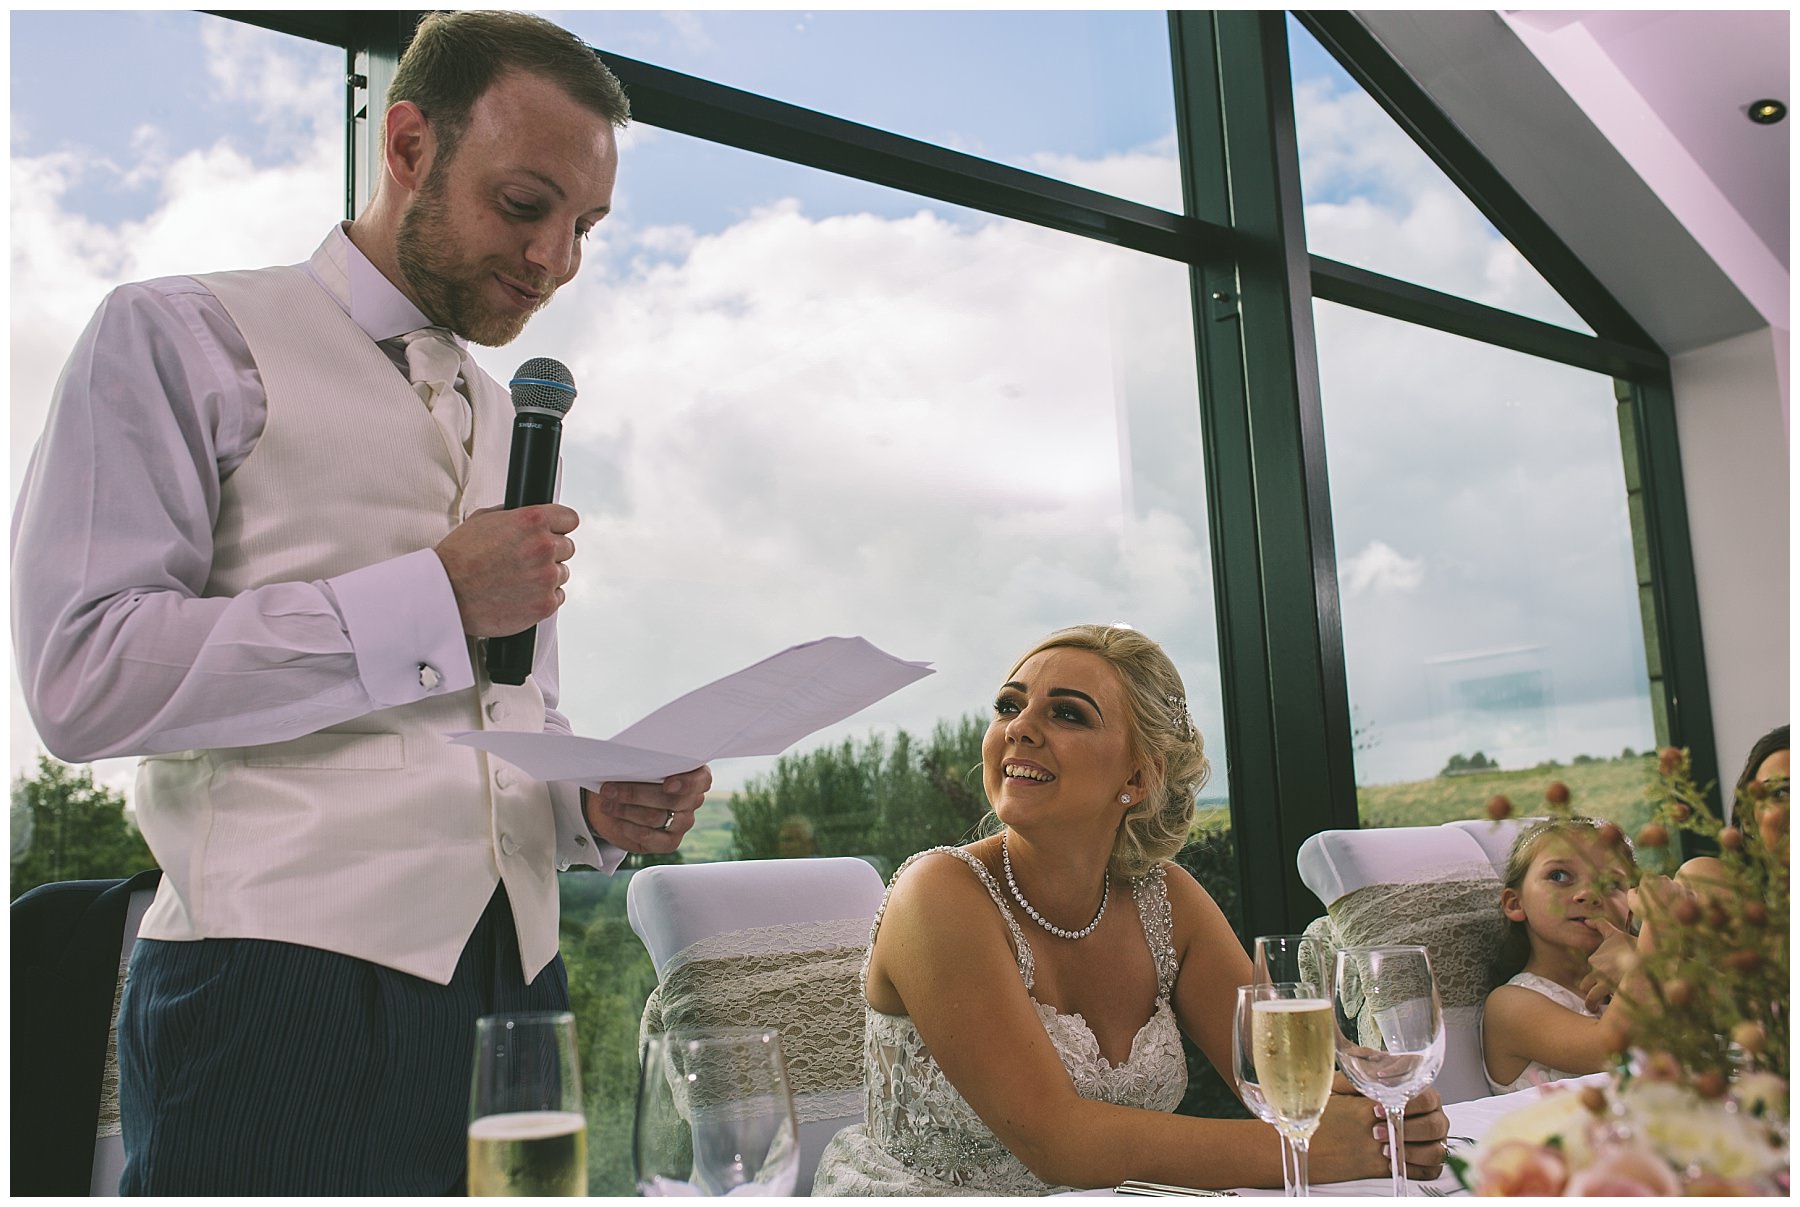 Bride looks at her new husband as he gives a speech